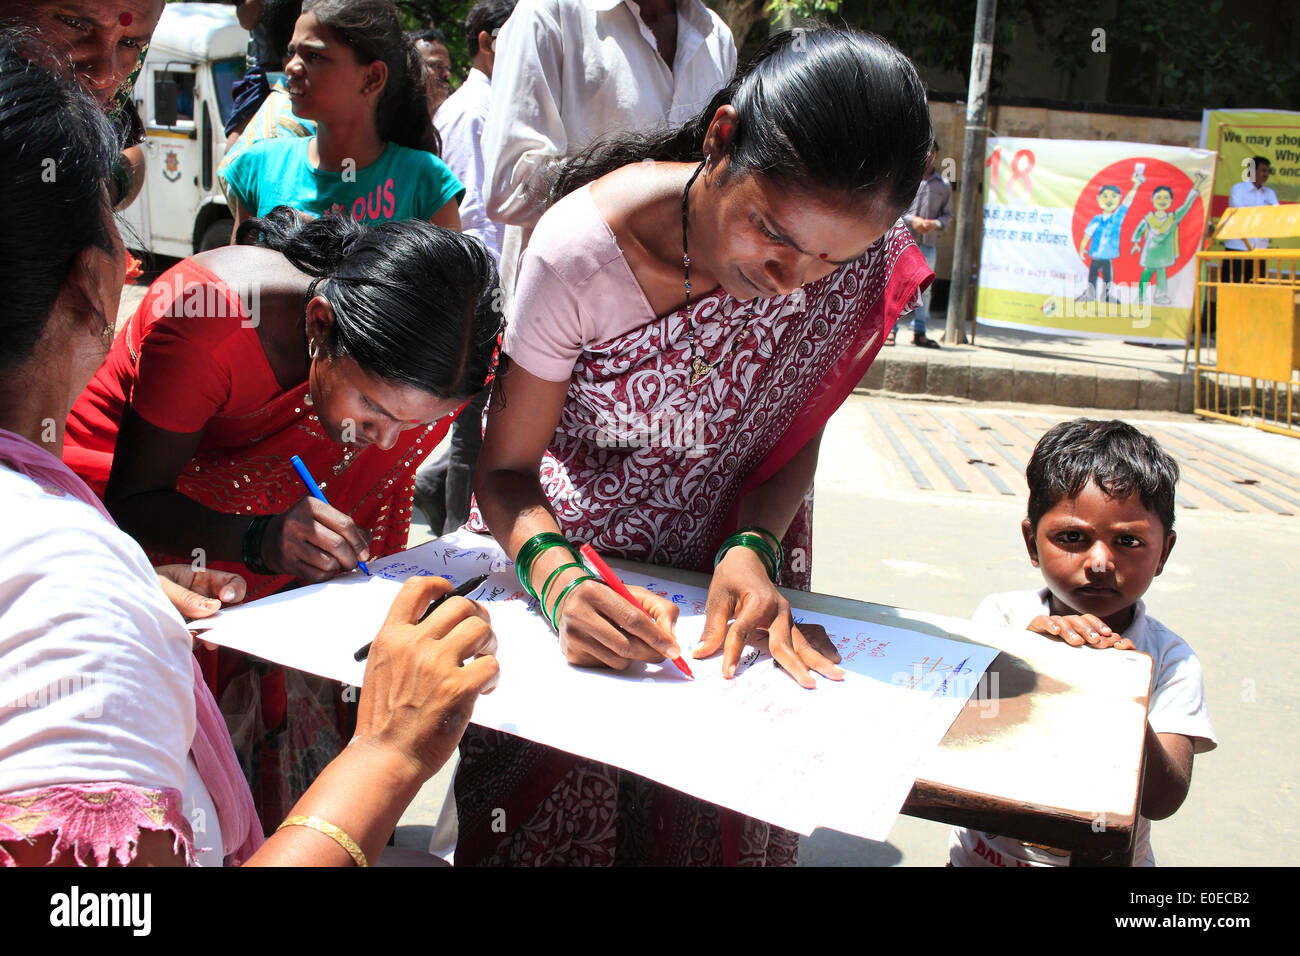 Mumbai, Maharashtra, India. 14th Apr, 2014. On Dr. B.R. AMBEDKAR birthday which falls on 14th April, women of Dalit (Lower Caste) community sign a charter declaring that will step out & cast their votes. © Subhash Sharma/ZUMA Wire/ZUMAPRESS.com/Alamy Live News Stock Photo